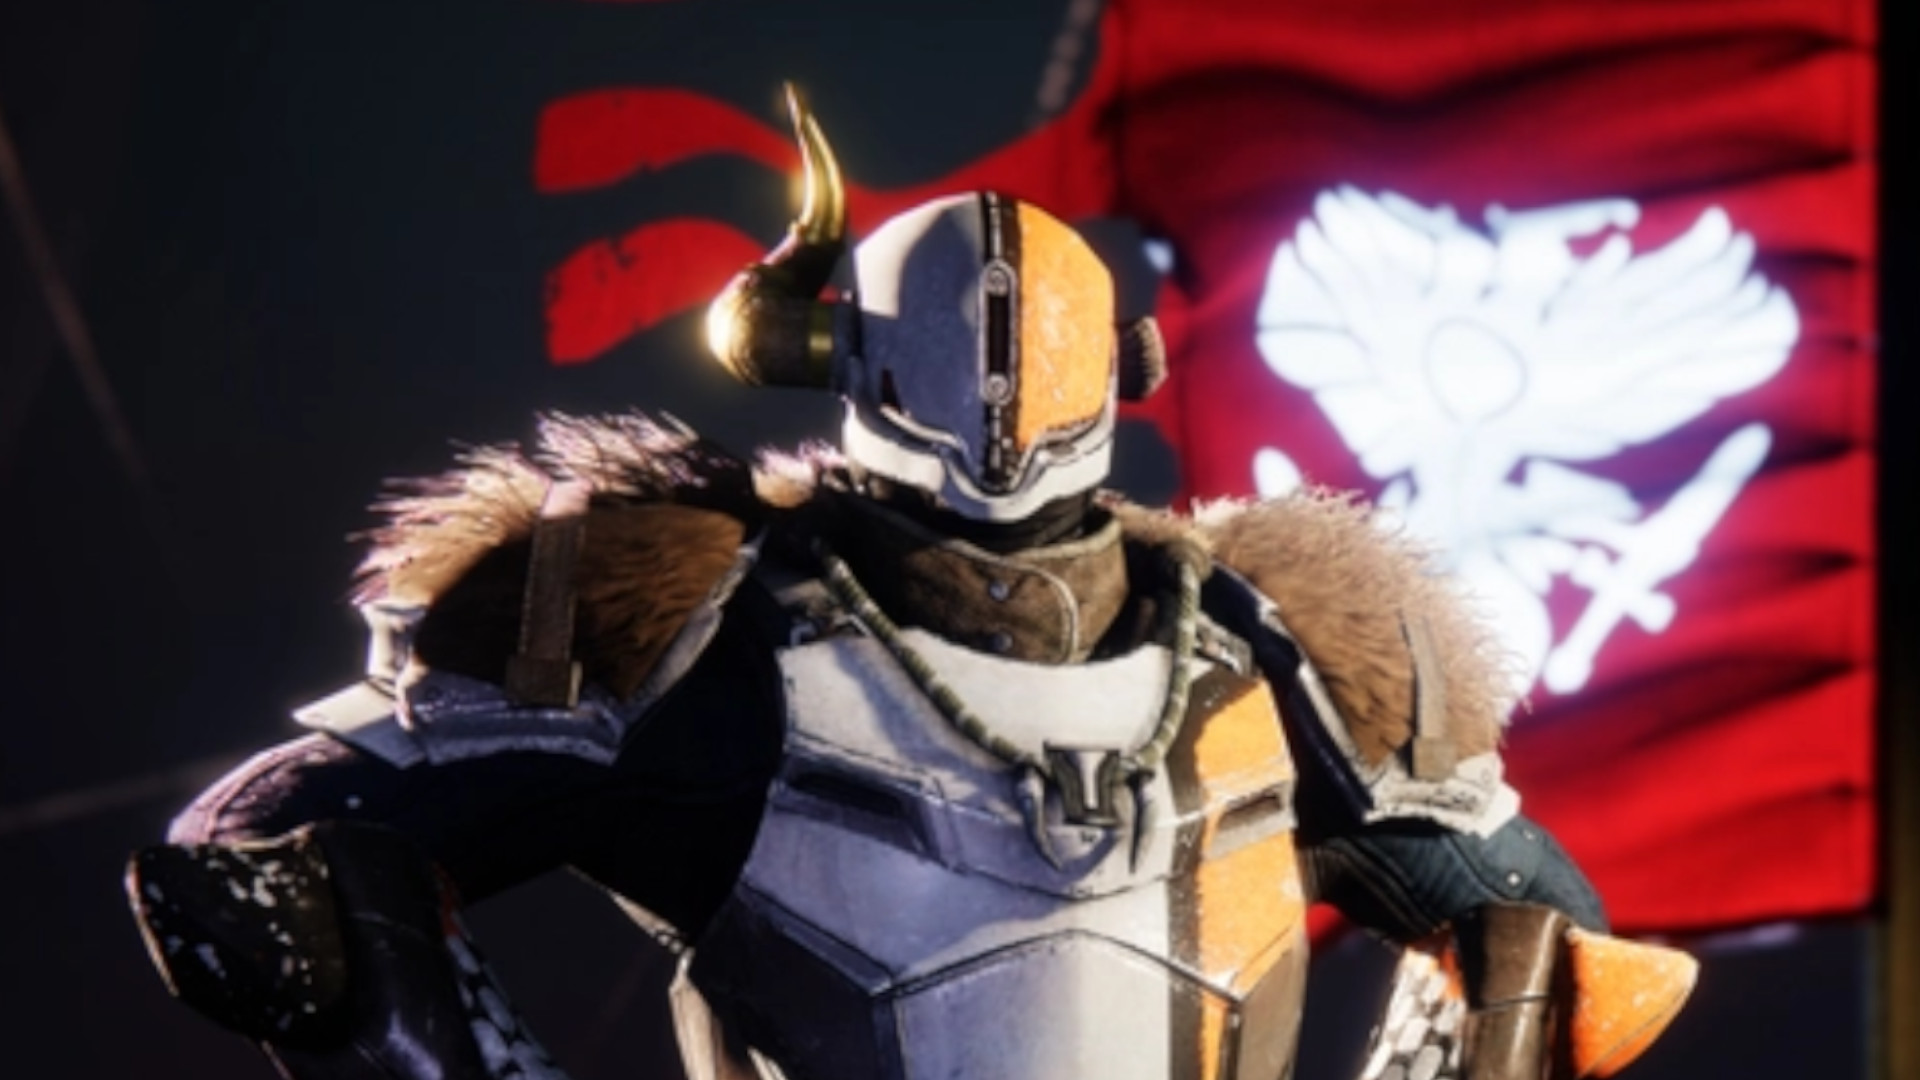 Xbox and Bungie teaming up for a special Destiny 2 livestream